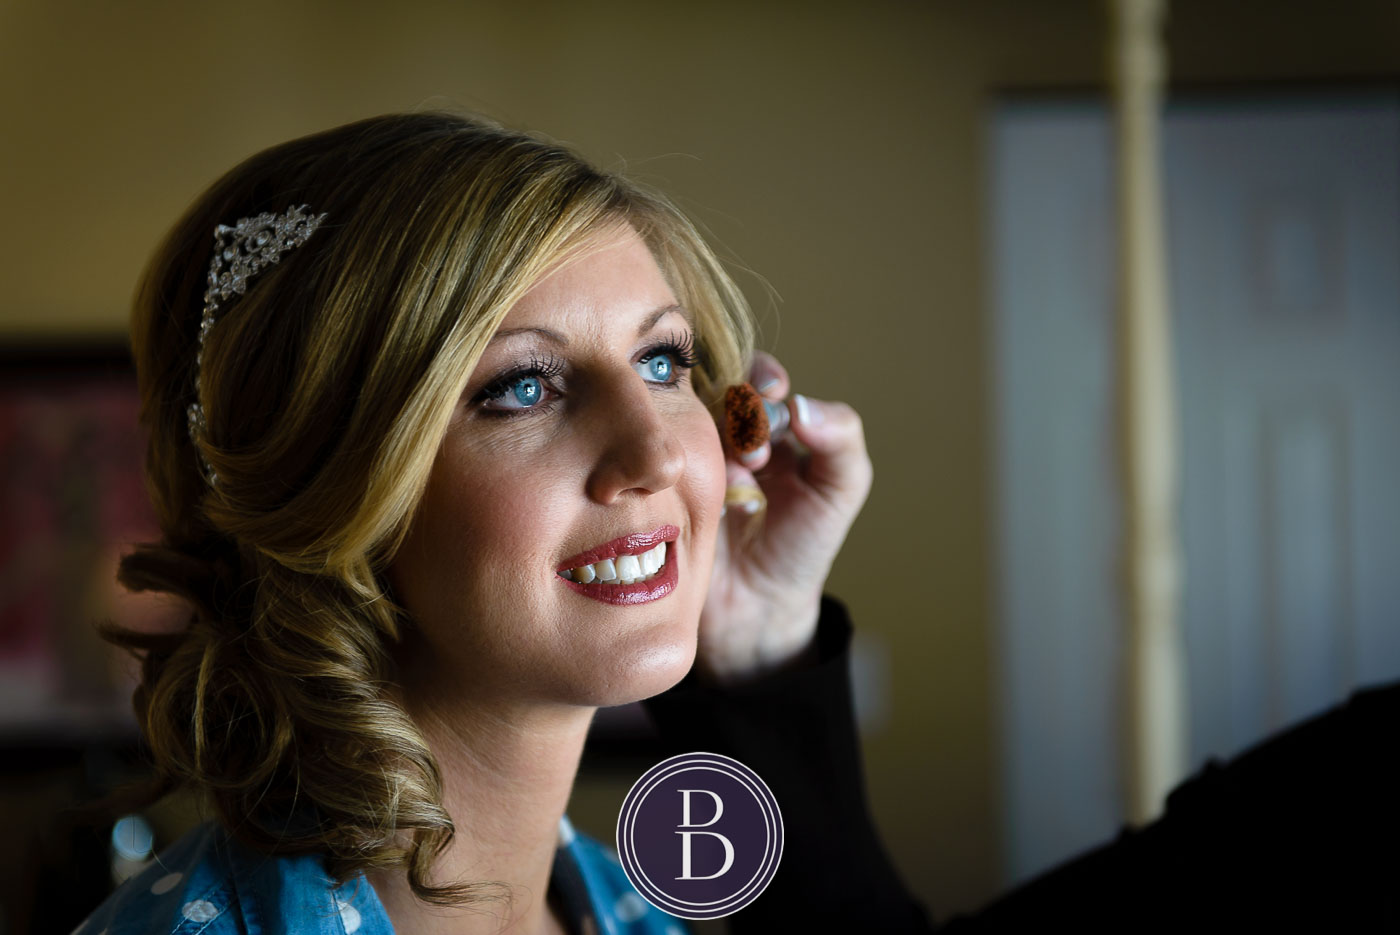 Final makeup touches for bride winter wedding